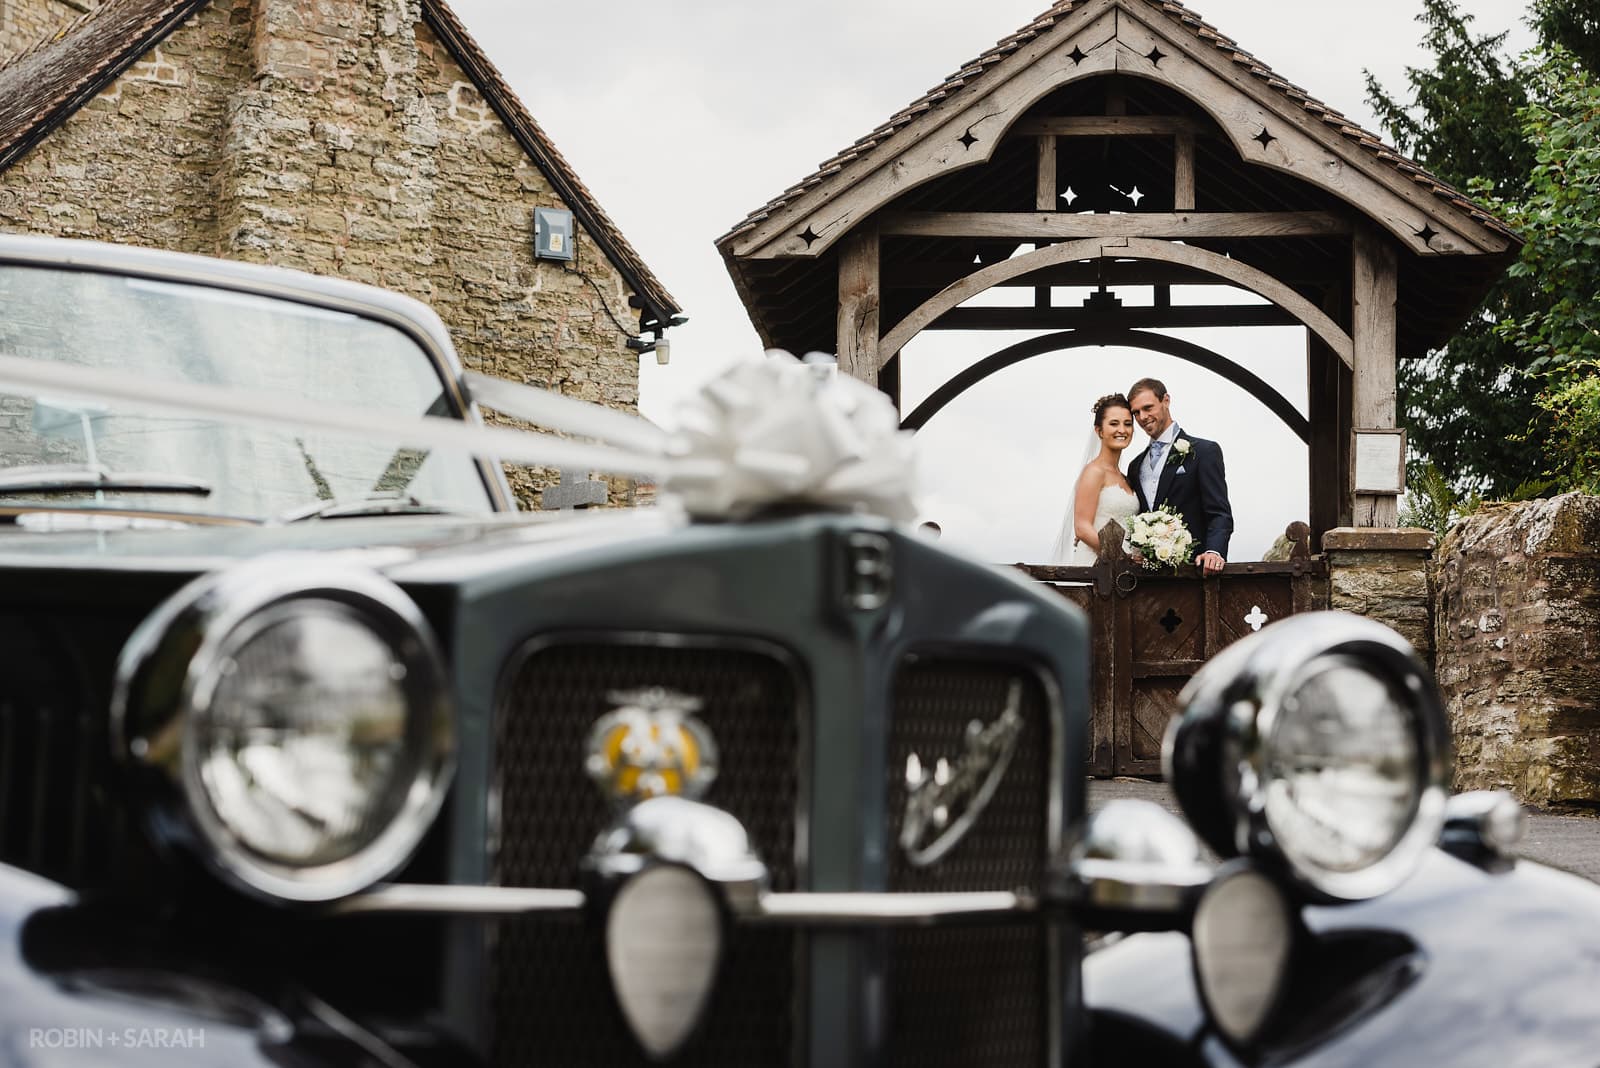 Bride and groom under lychgate at church with wedding car in foreground